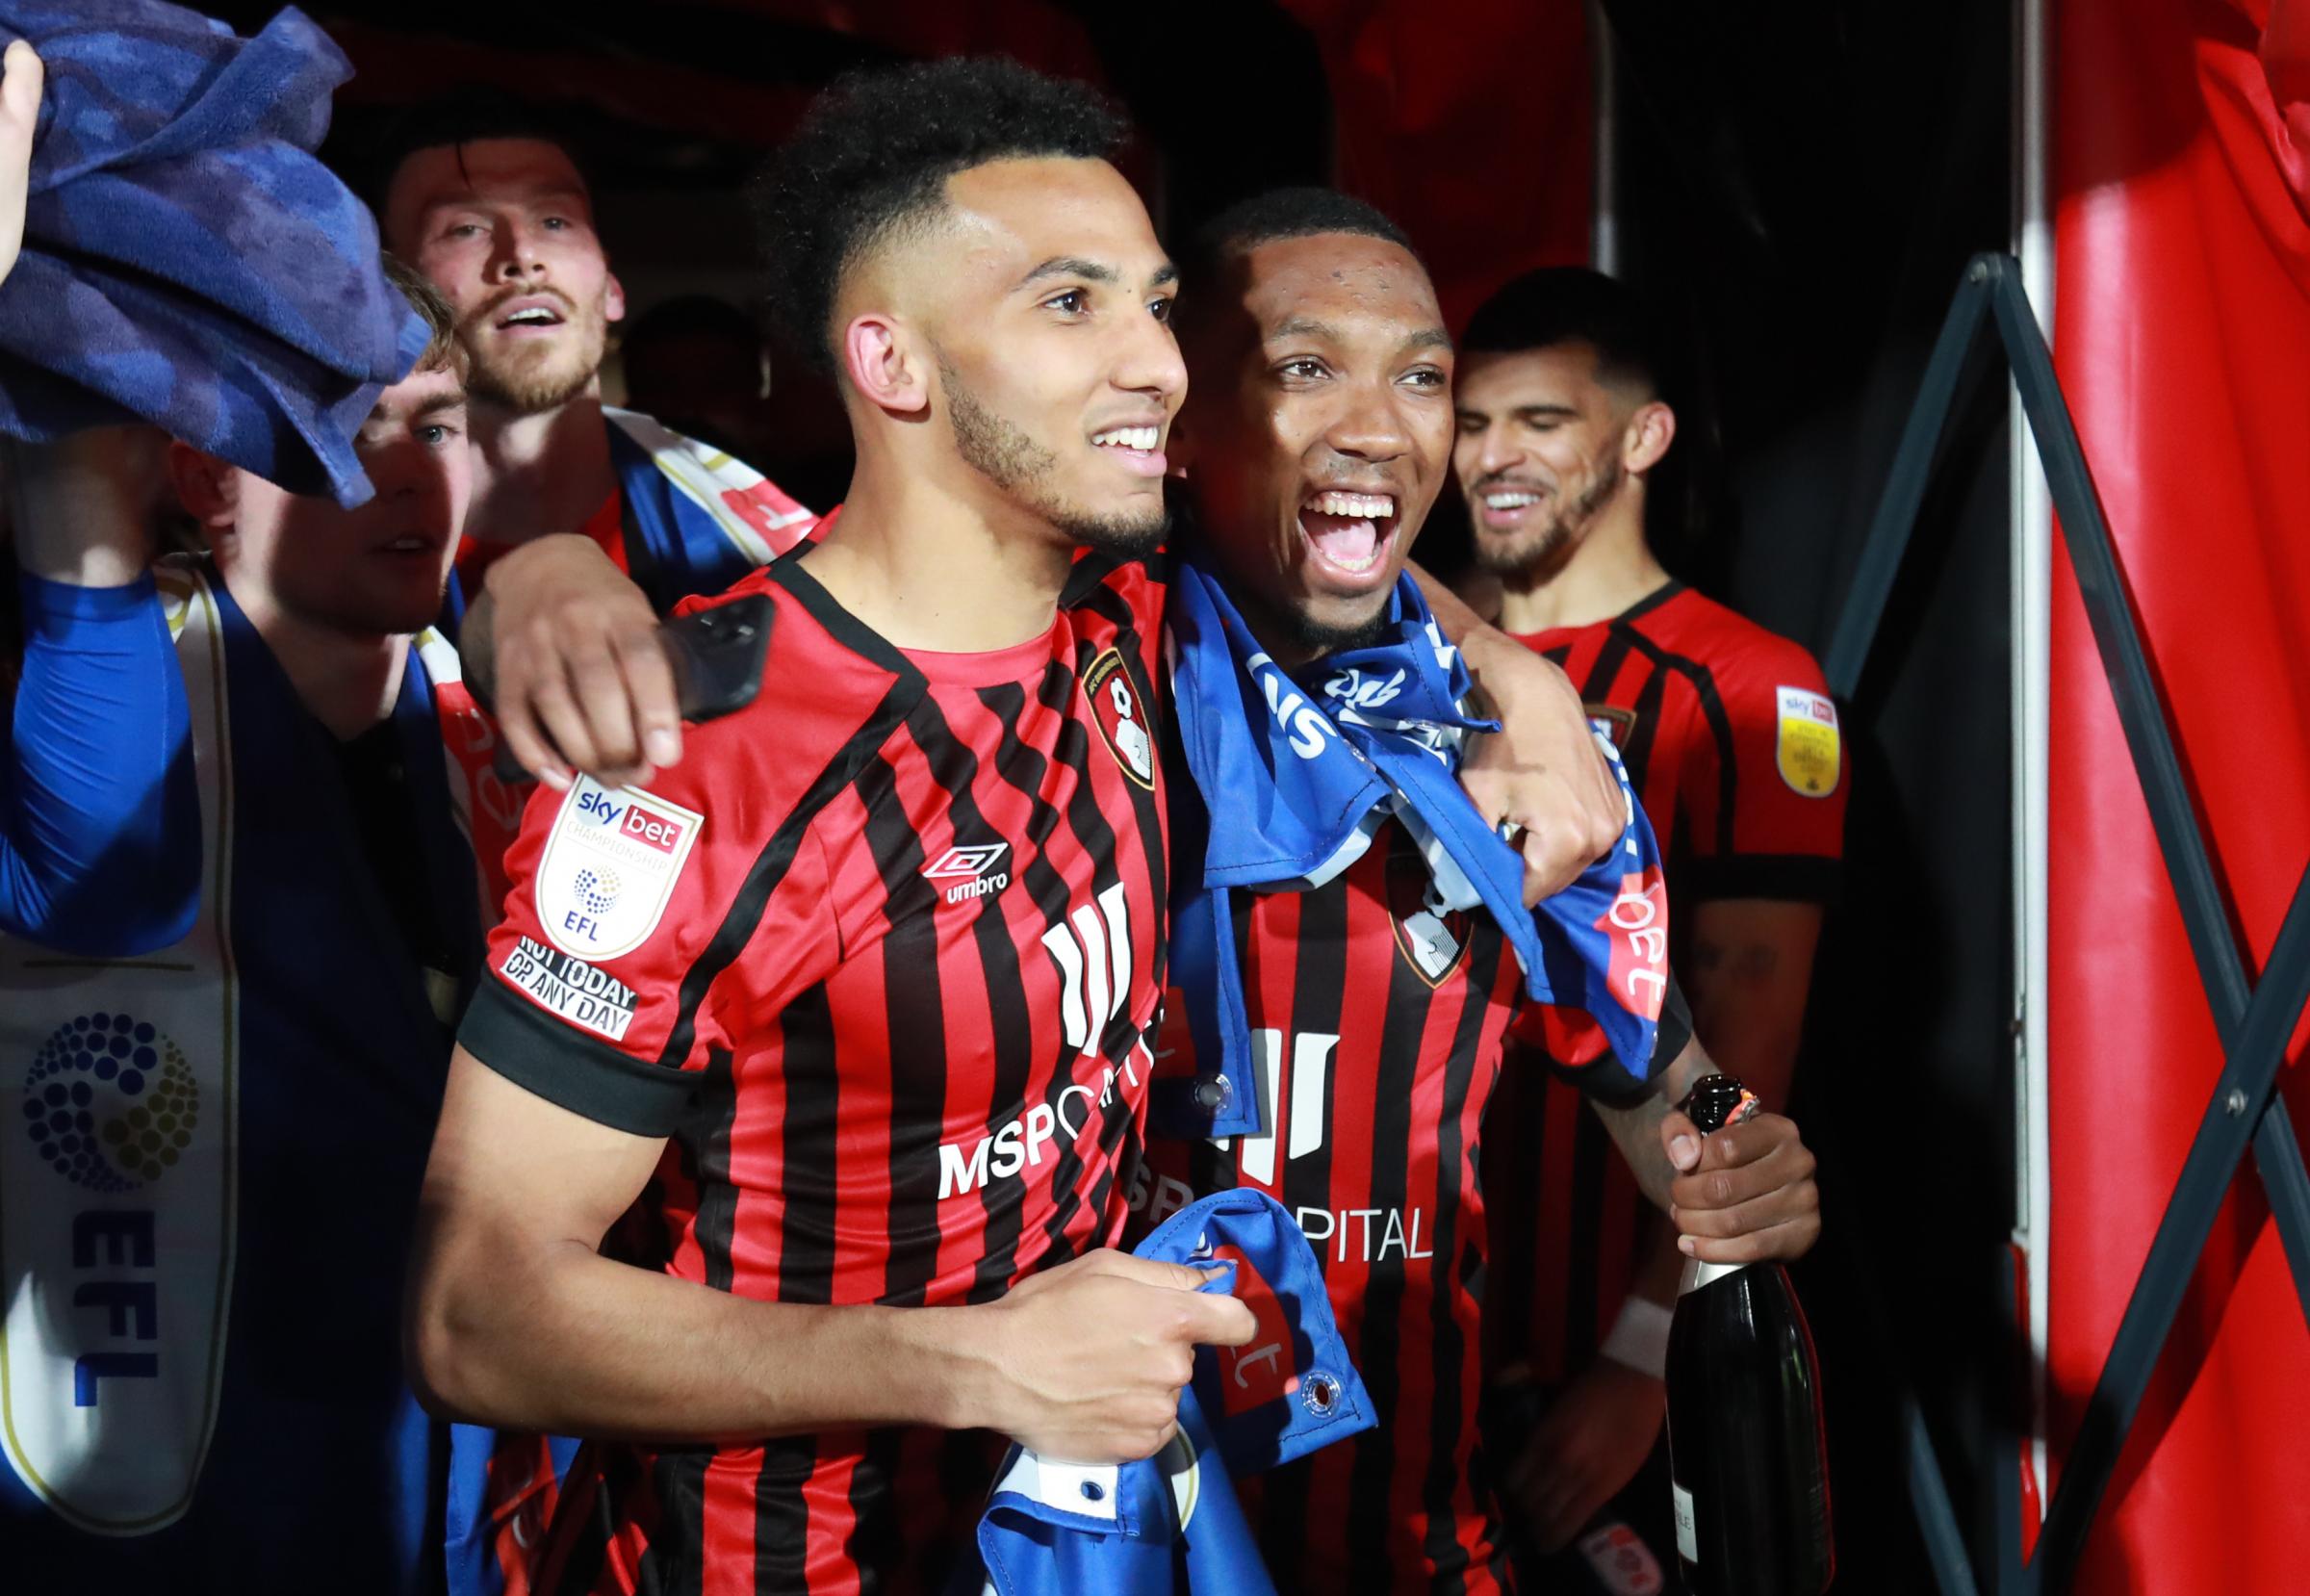 AFC Bournemouth v Nottingham Forest in Championship game at Vitality Stadium. AFC Bournemouth gain automatic promotion back to the Premier League. Mark Travers, Lloyd Kelly and Jaidon Anthony.